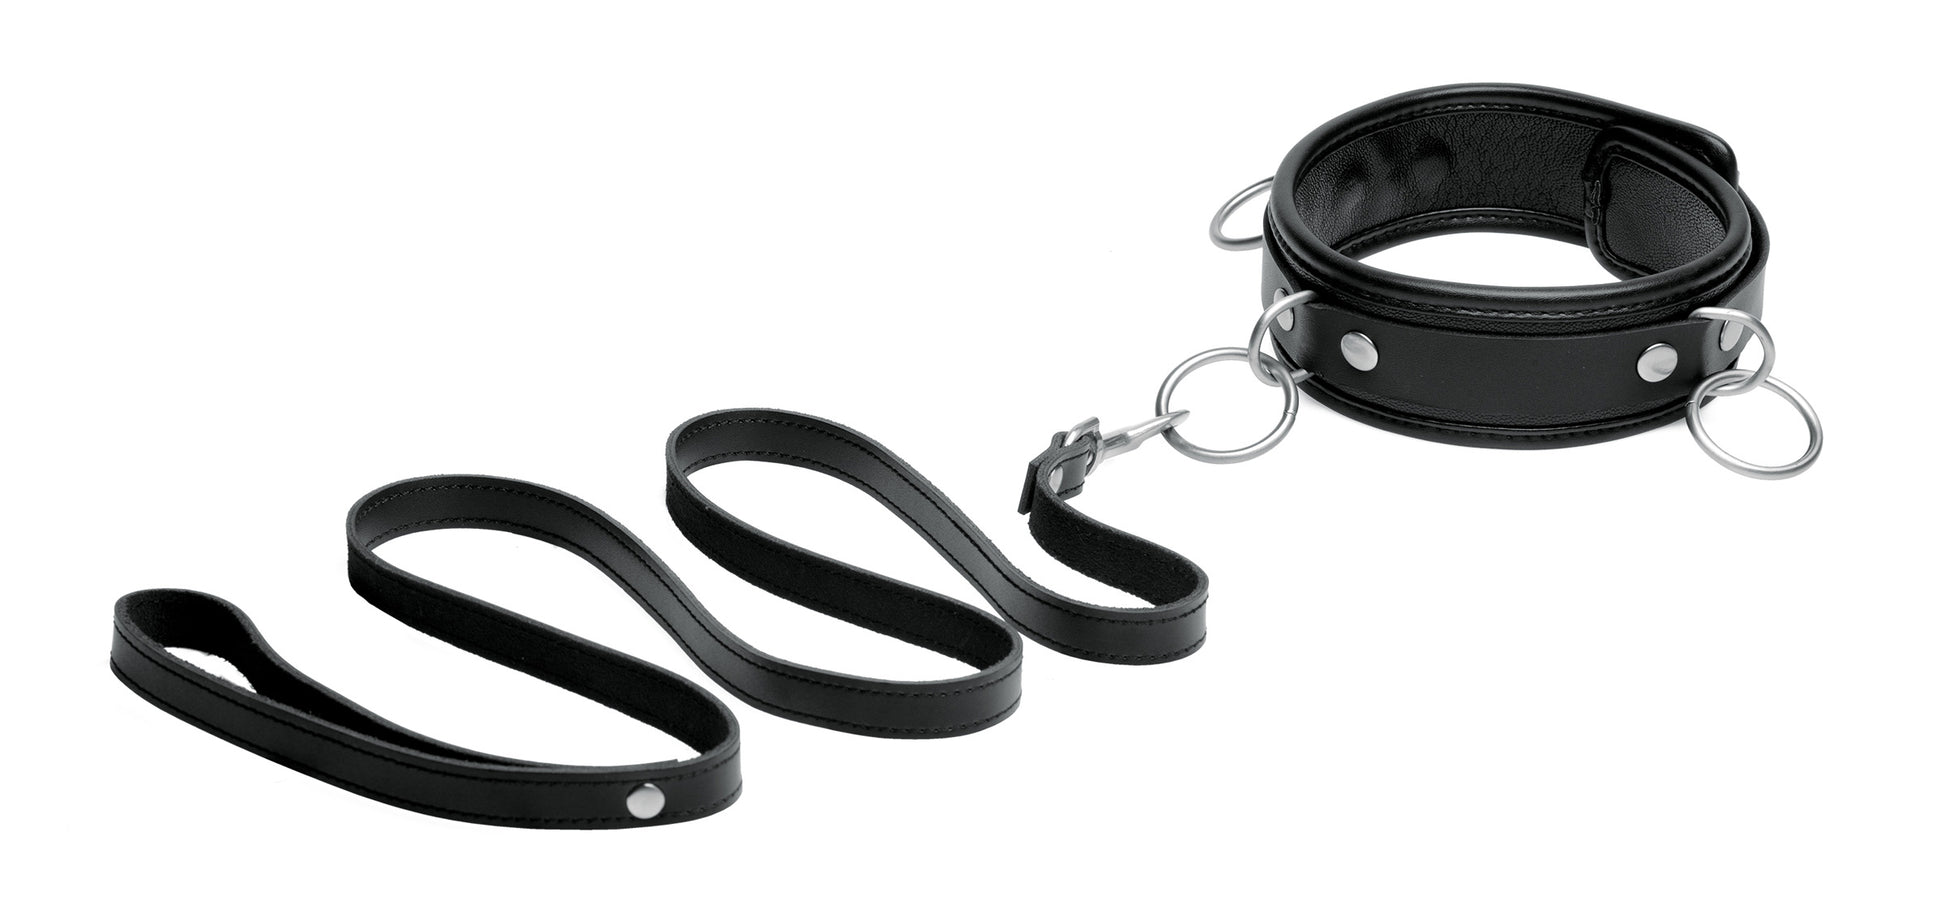 Isabella Sinclaire 3 Ring Leather Collar with Leash - UABDSM